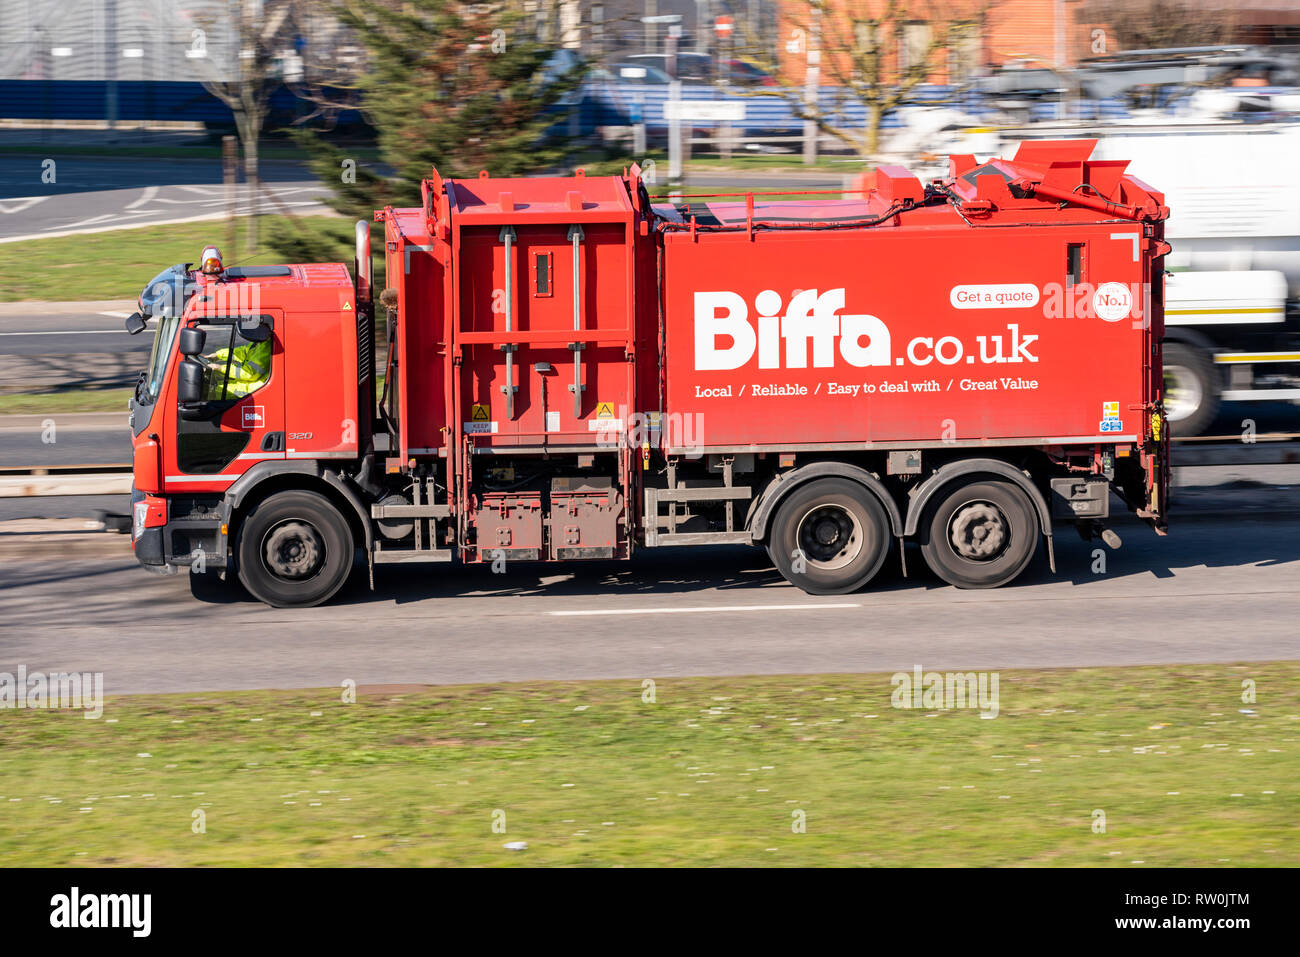 Biffa business waste rubbish collection vehicle, lorry, truck driving on the road. Refuse truck, bin lorry Stock Photo